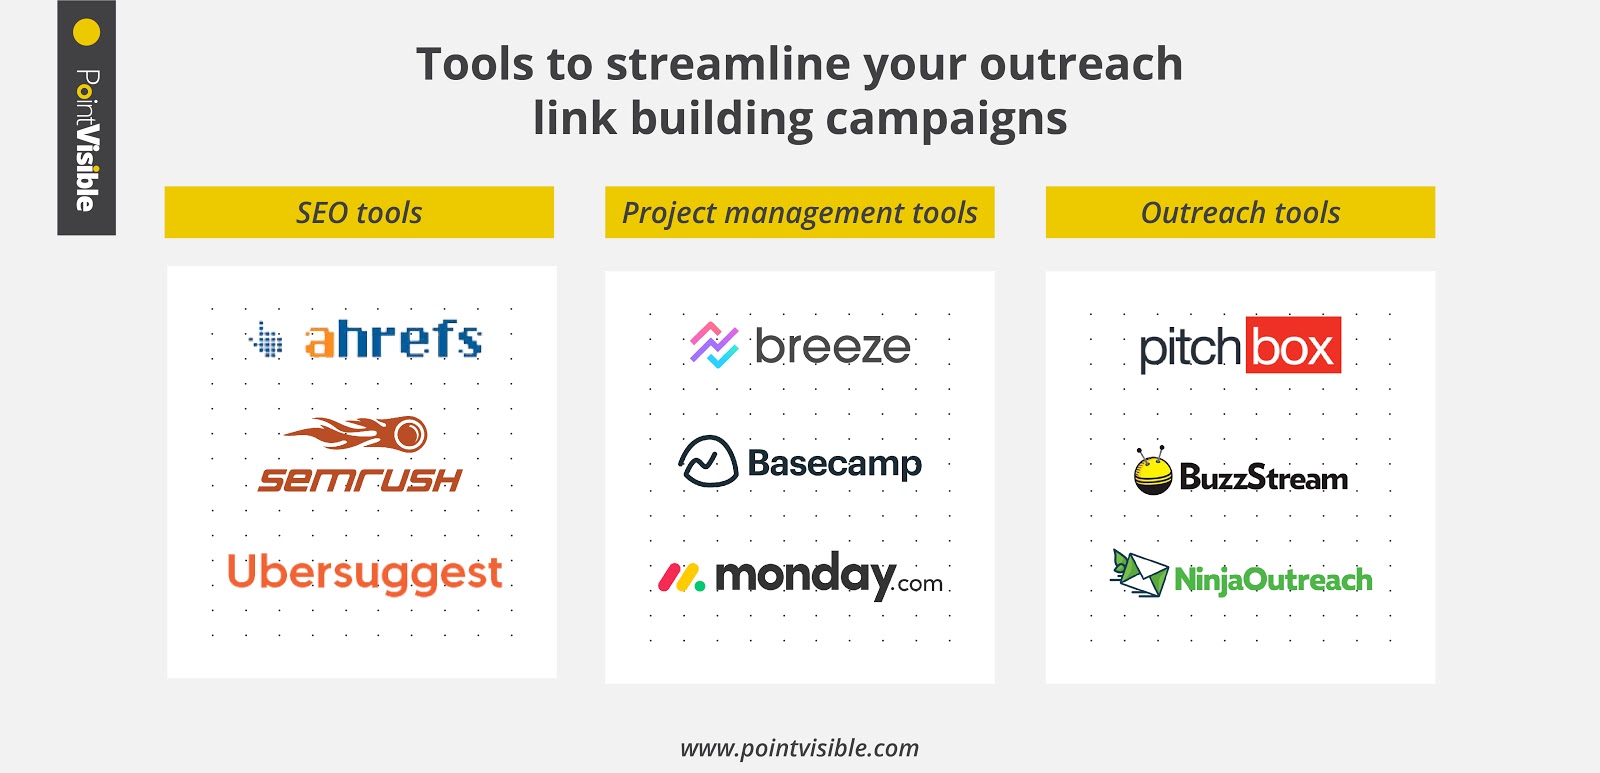 Tools for link building